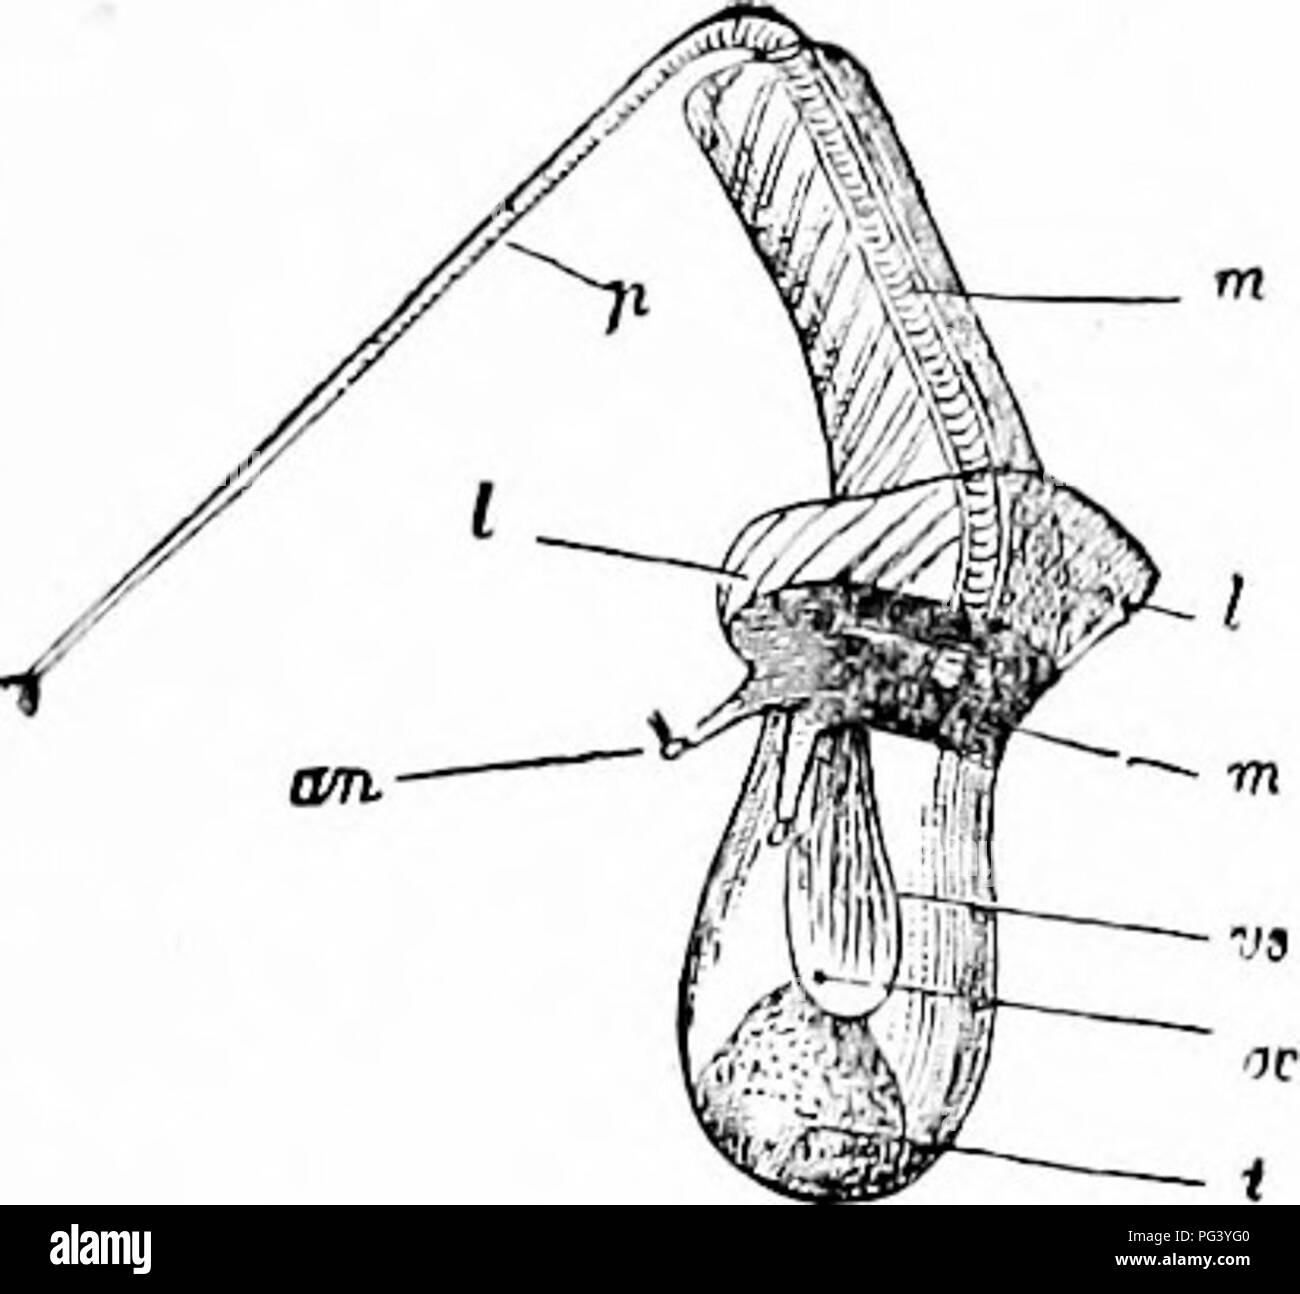 . A manual of zoology. Zoology. I. CRUSTACEA: CIRRIPEDIA 373 with few exceptions, in contrast to most otlier arthropods, are hermaphro- ditic, a condition possibly correlated with their sedentary life and the con- sequent need of self-impregnation. The testes lie in the sides of the body; the ovaries in the Lepadids are in the stalk, in the Balanids in the basal plate. In cases of several solitary hemaphrodite species complementary dwarf males occur. These are very small, purely male forms, with ex- tremely simple structure (fig. 392), which live inside the mantle cavity near the genital openi Stock Photo